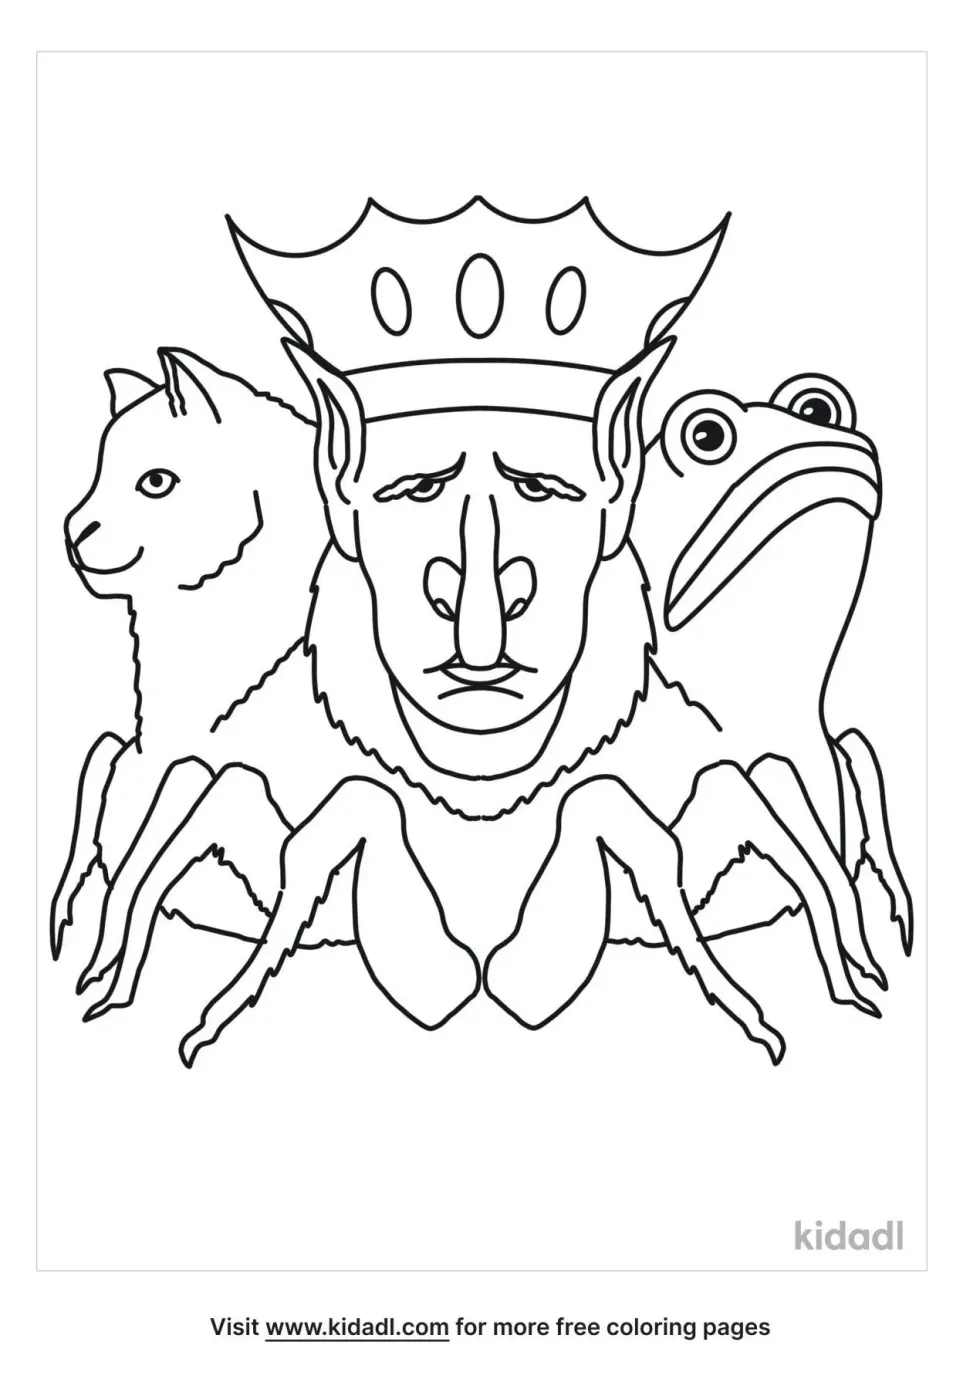 Baal Coloring Page